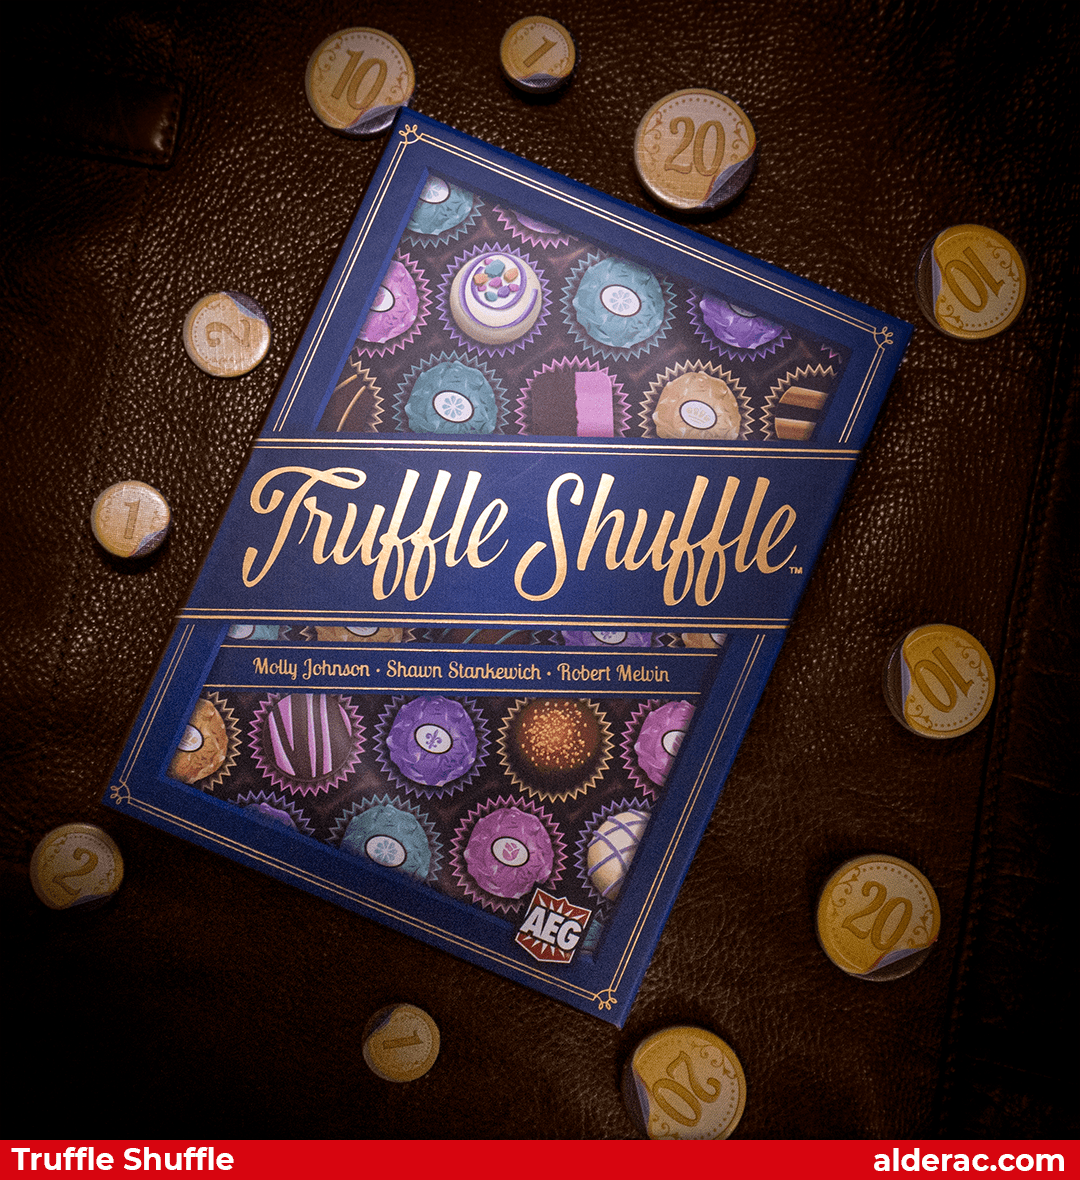 Truffle shuffle box surrounded by coins